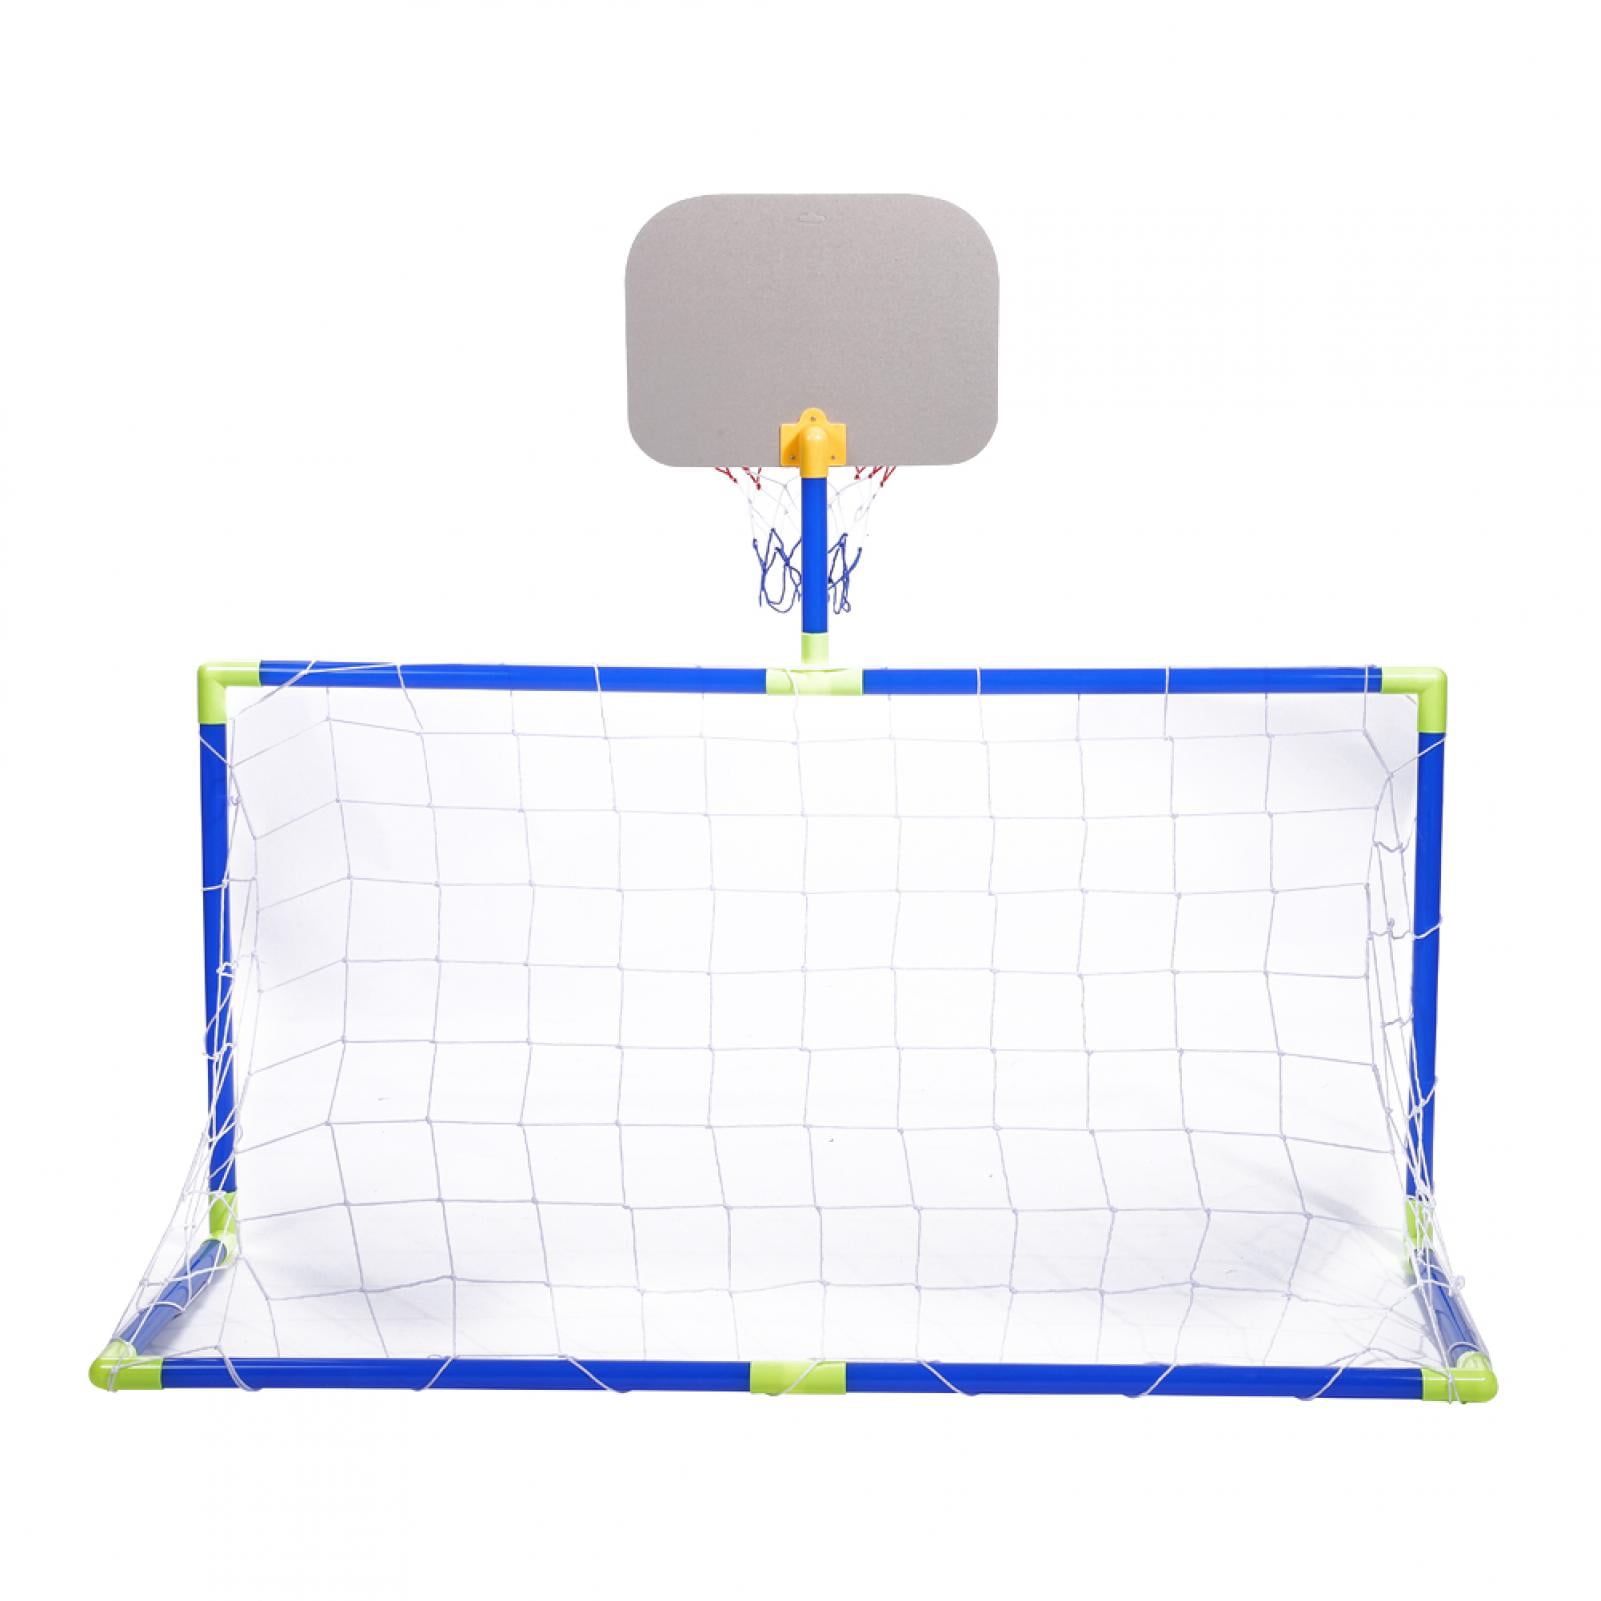 Hanging Basketball Board with Ball and Pump for Kids EBTOOLS Mini Basketball System 